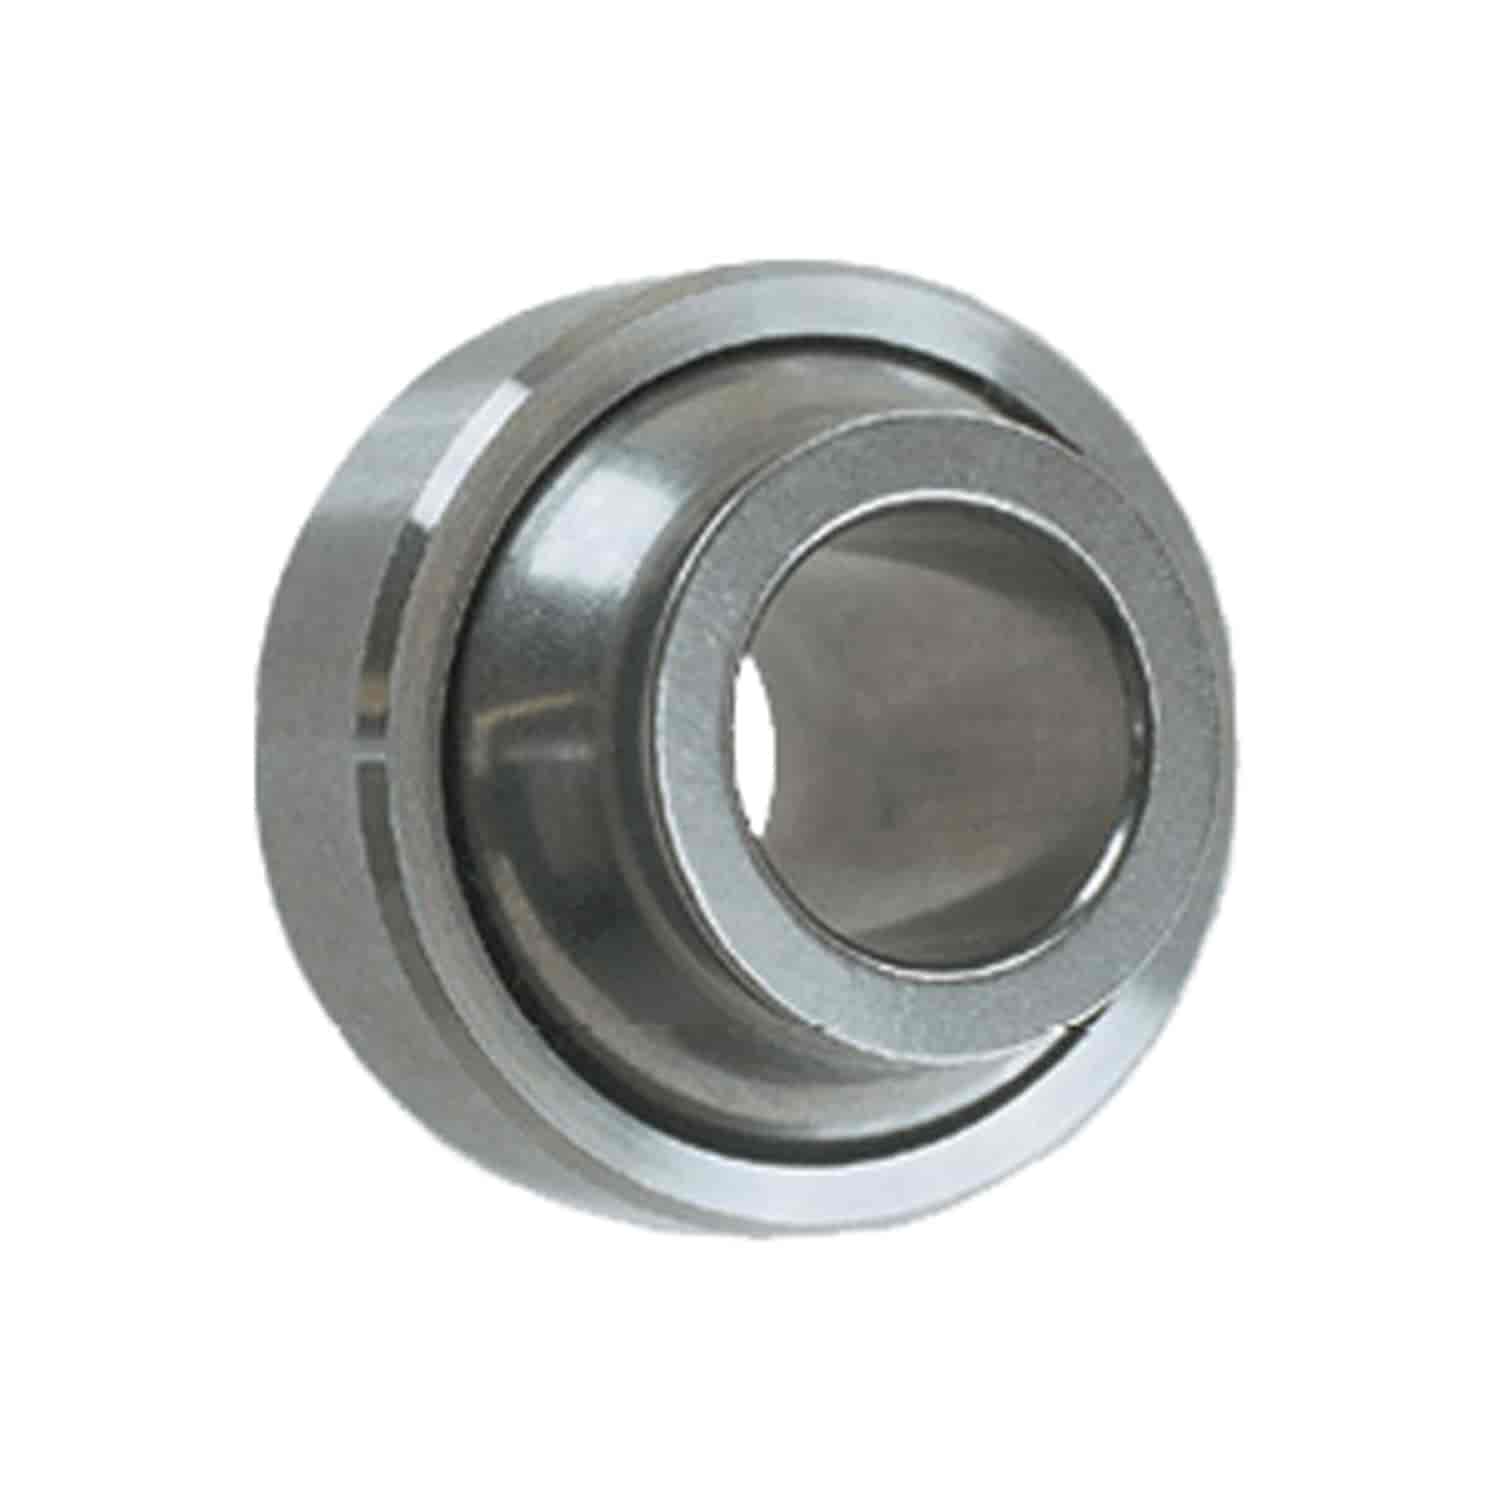 High Misalignment 440C SS Shperical Bearing Hole Size: